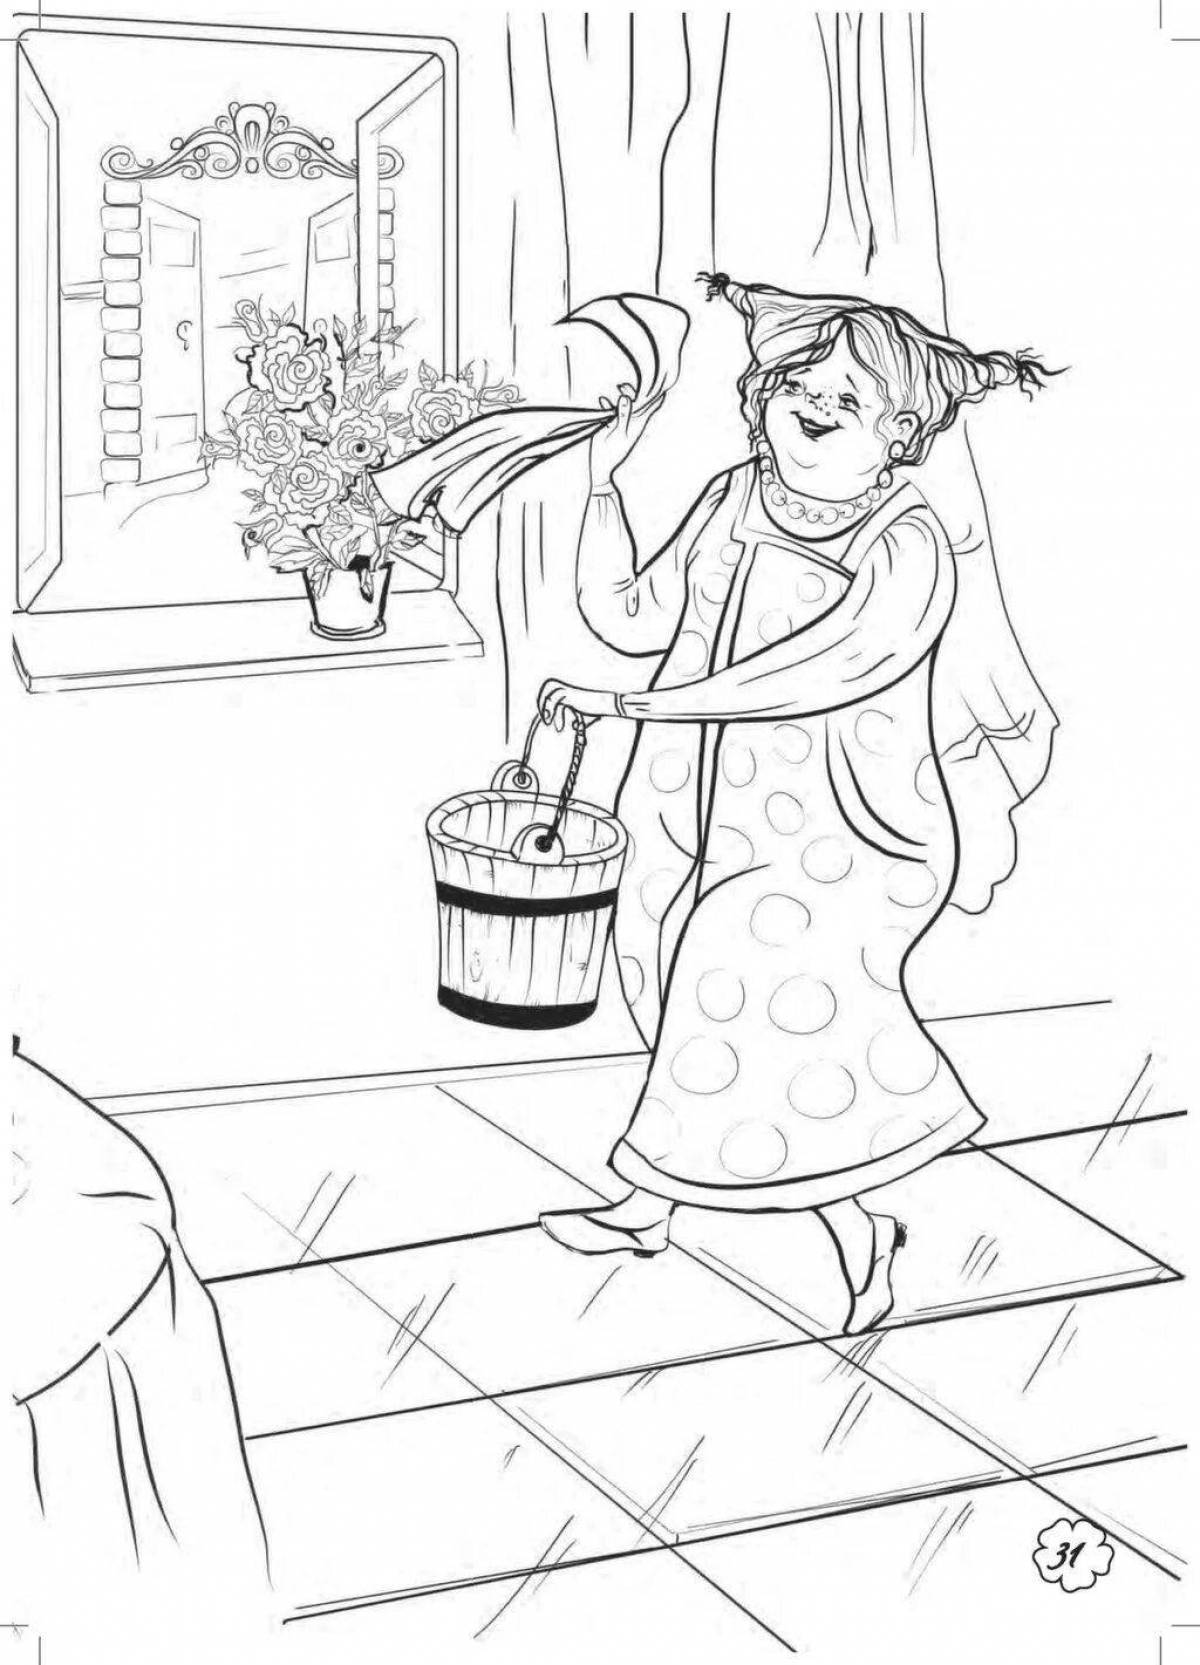 Coloring page bright lady snowstorm